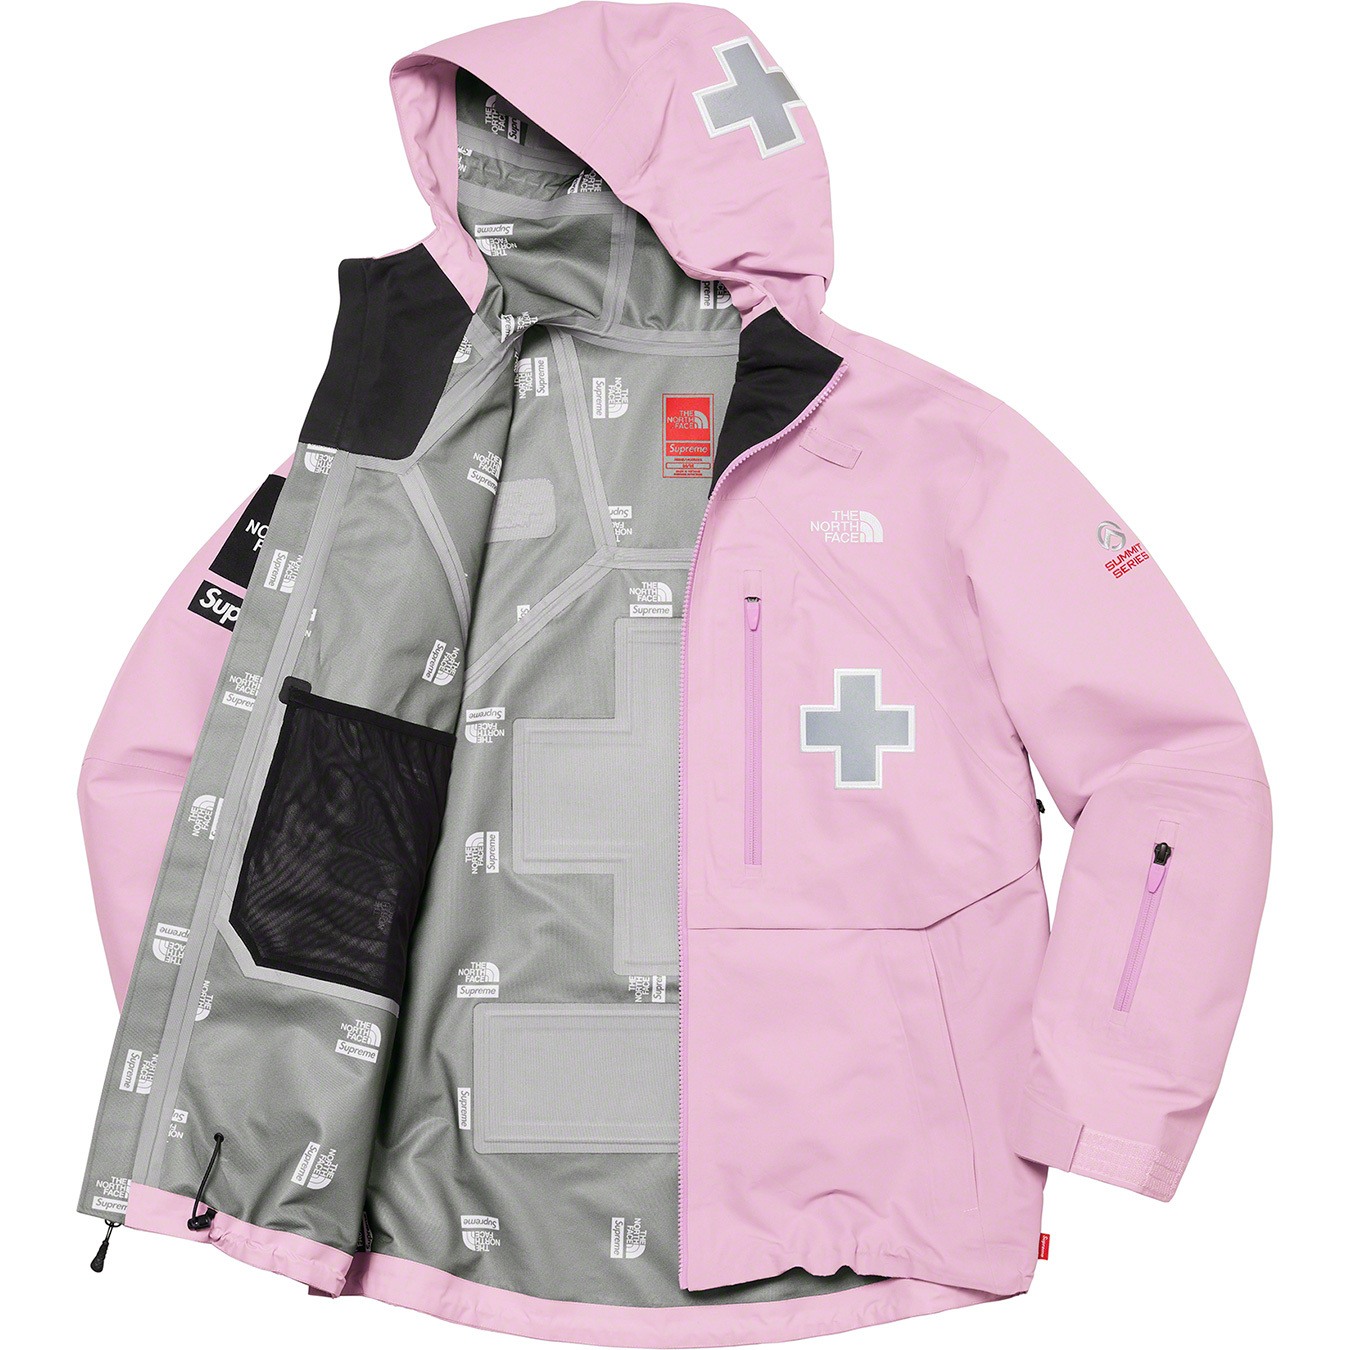 Supreme®/The North Face® Summit Series Rescue Mountain Pro Jacket 